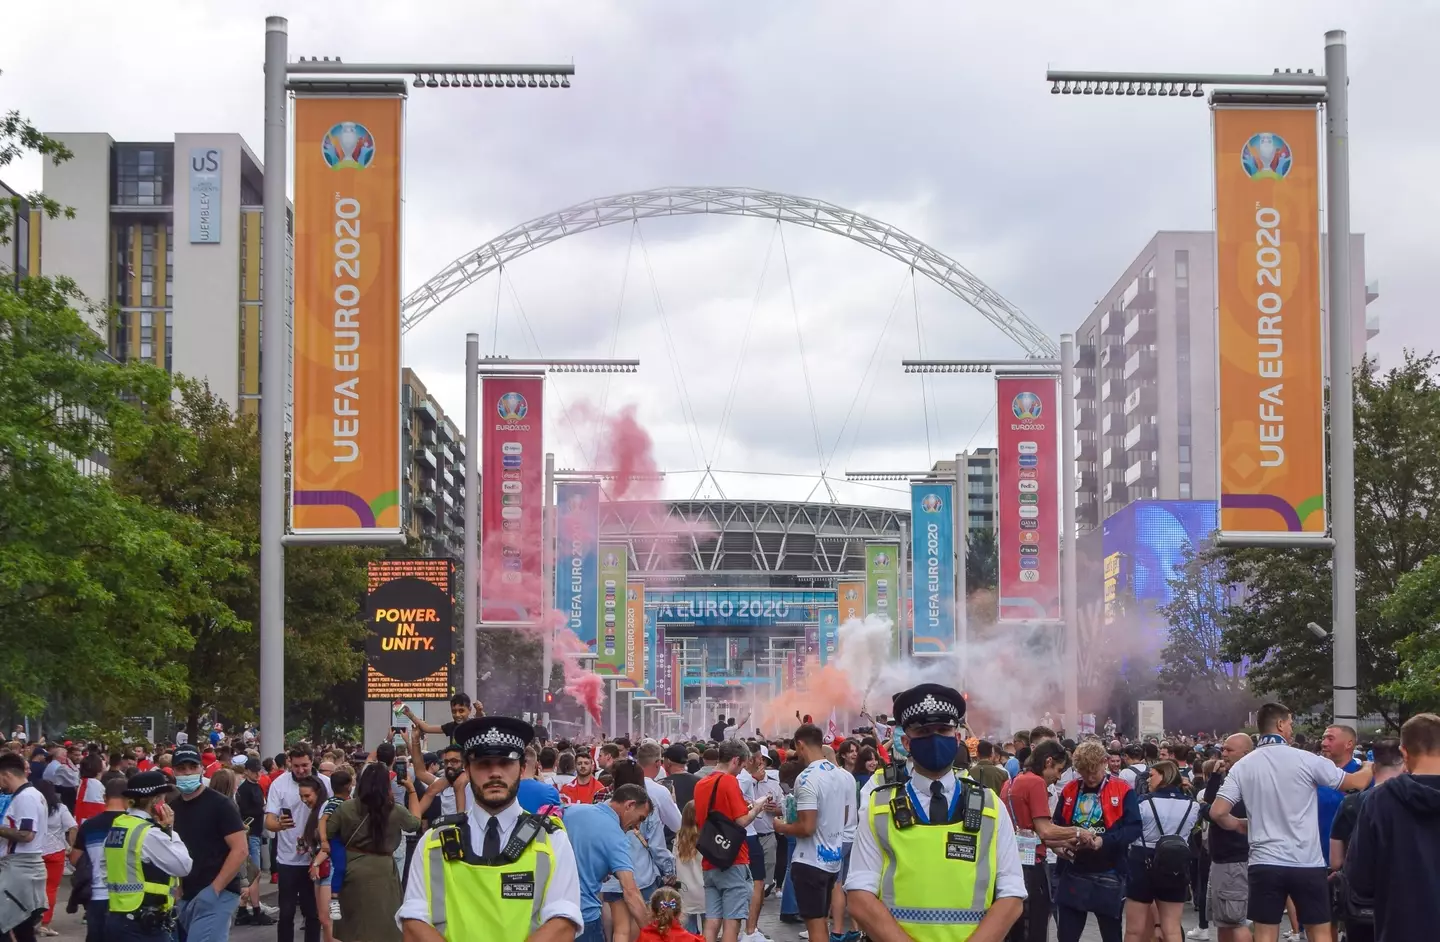 Fans outside Wembley prior to last summer's Euro 2020 final. (Image